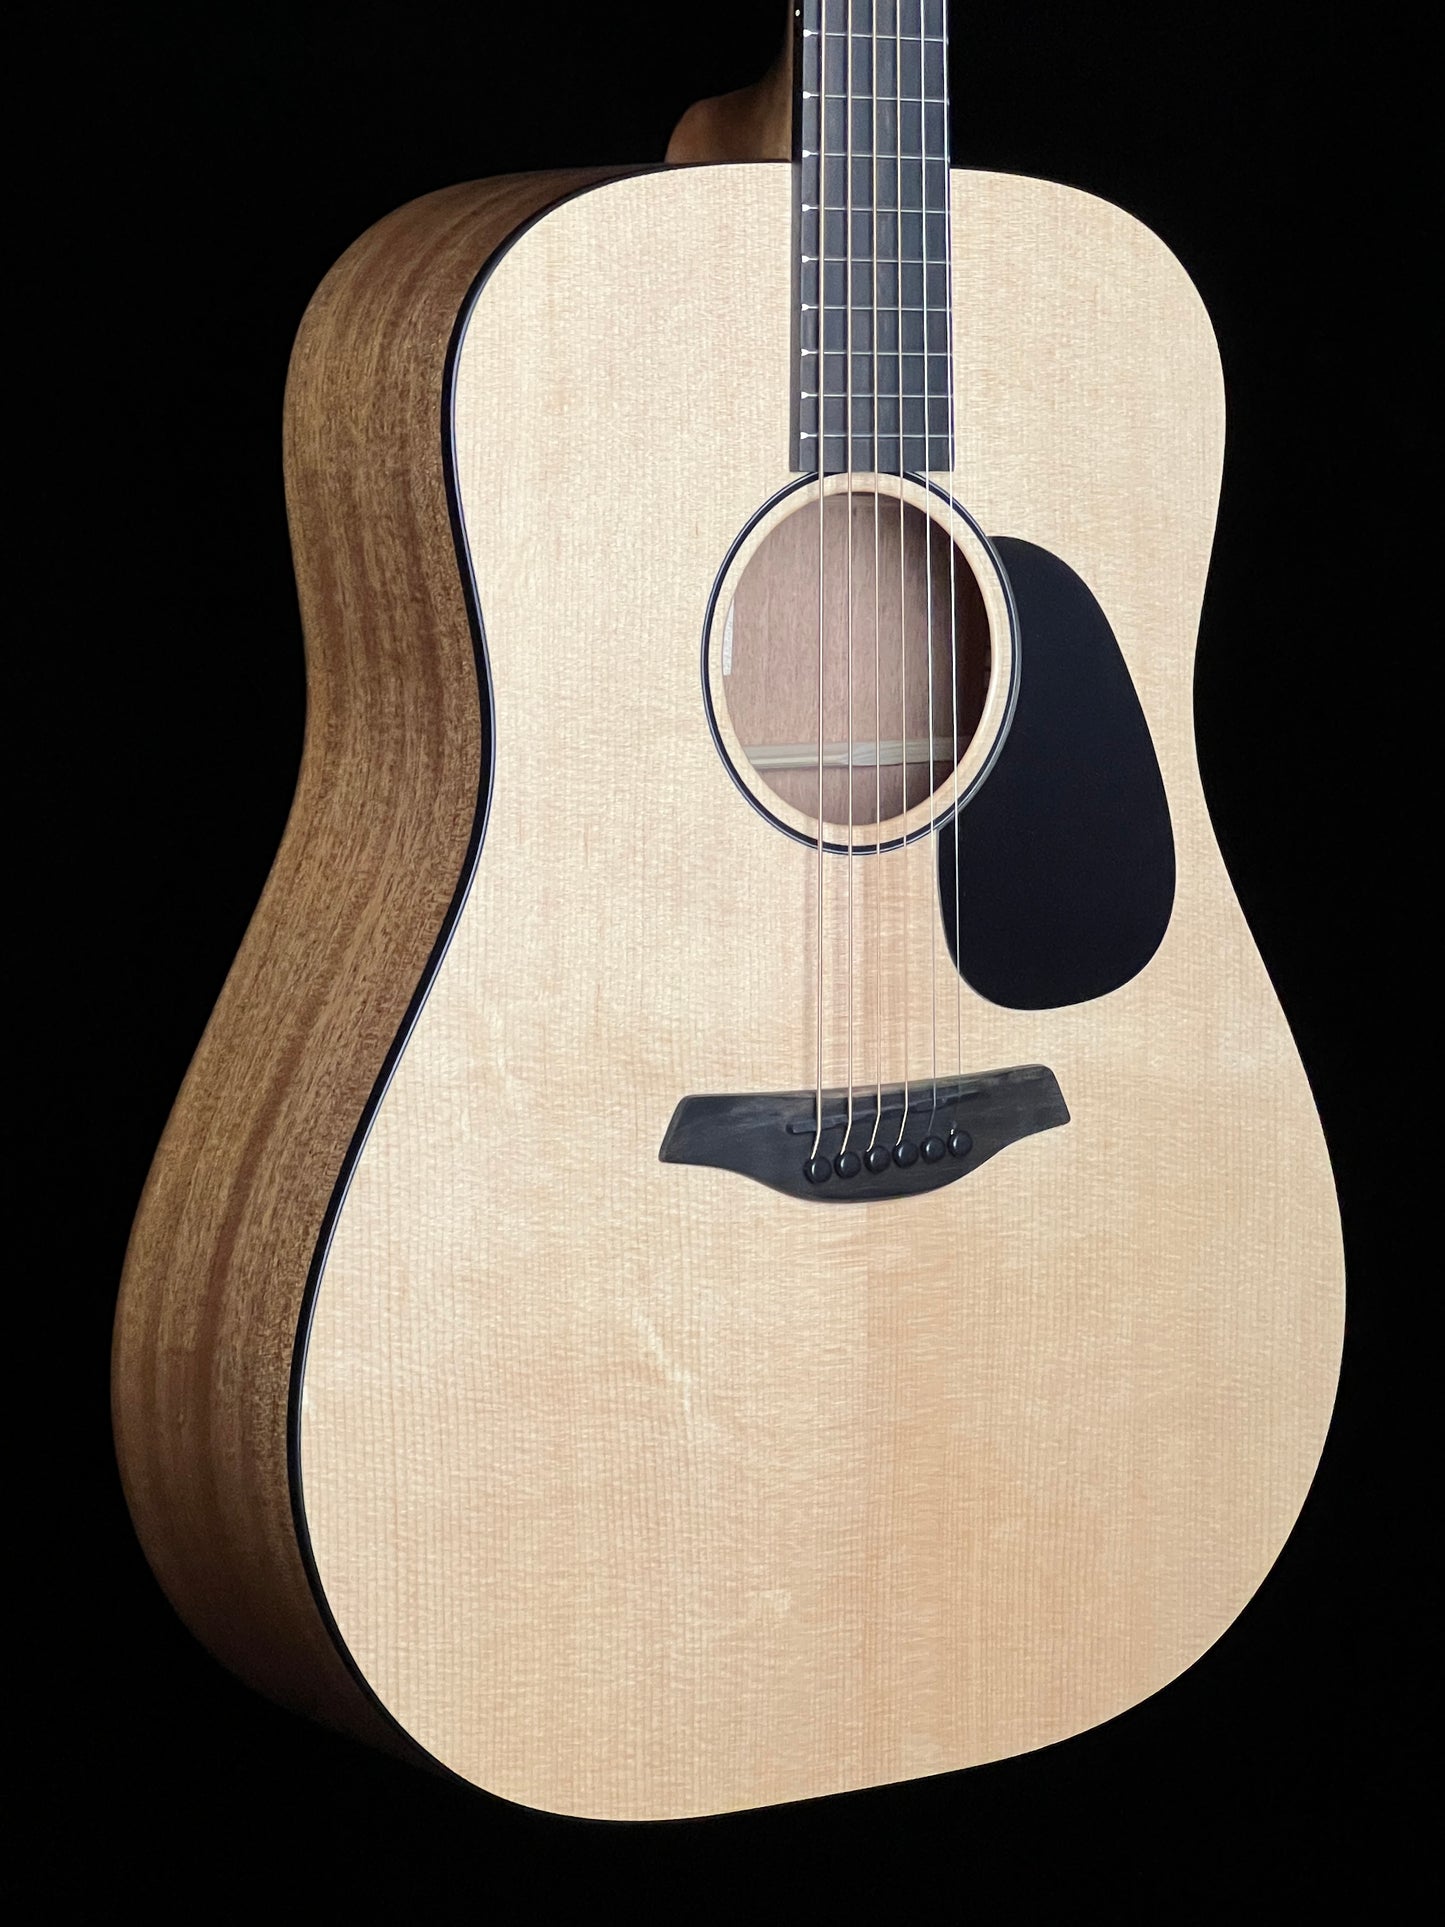 SOLD - Furch Violet D-SM Dreadnought Acoustic Guitar Sitka Spruce/ African Mahogany - New